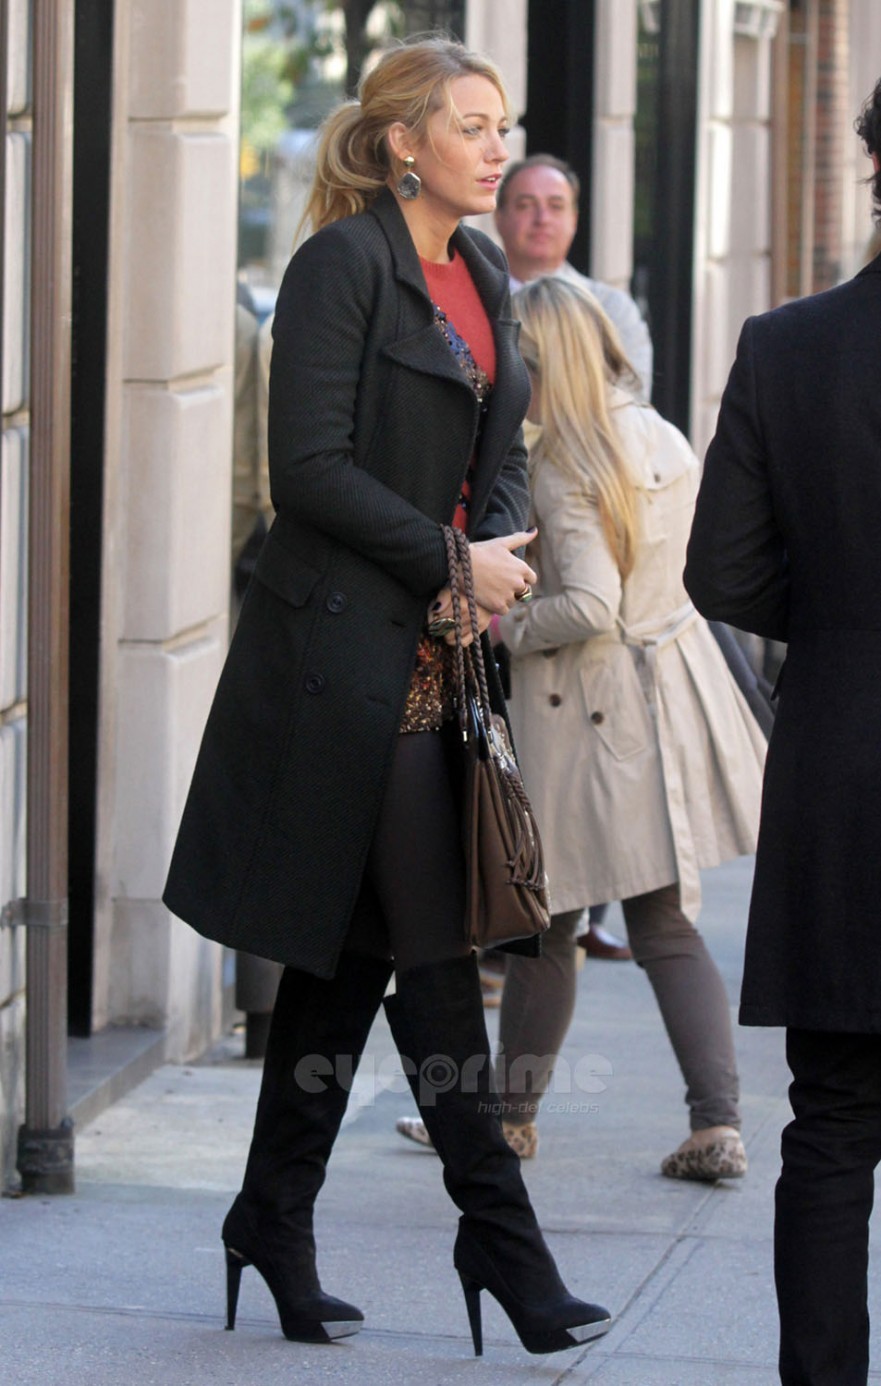 Blake Lively seen around on the Gossip Girl Set in NY Oct 25